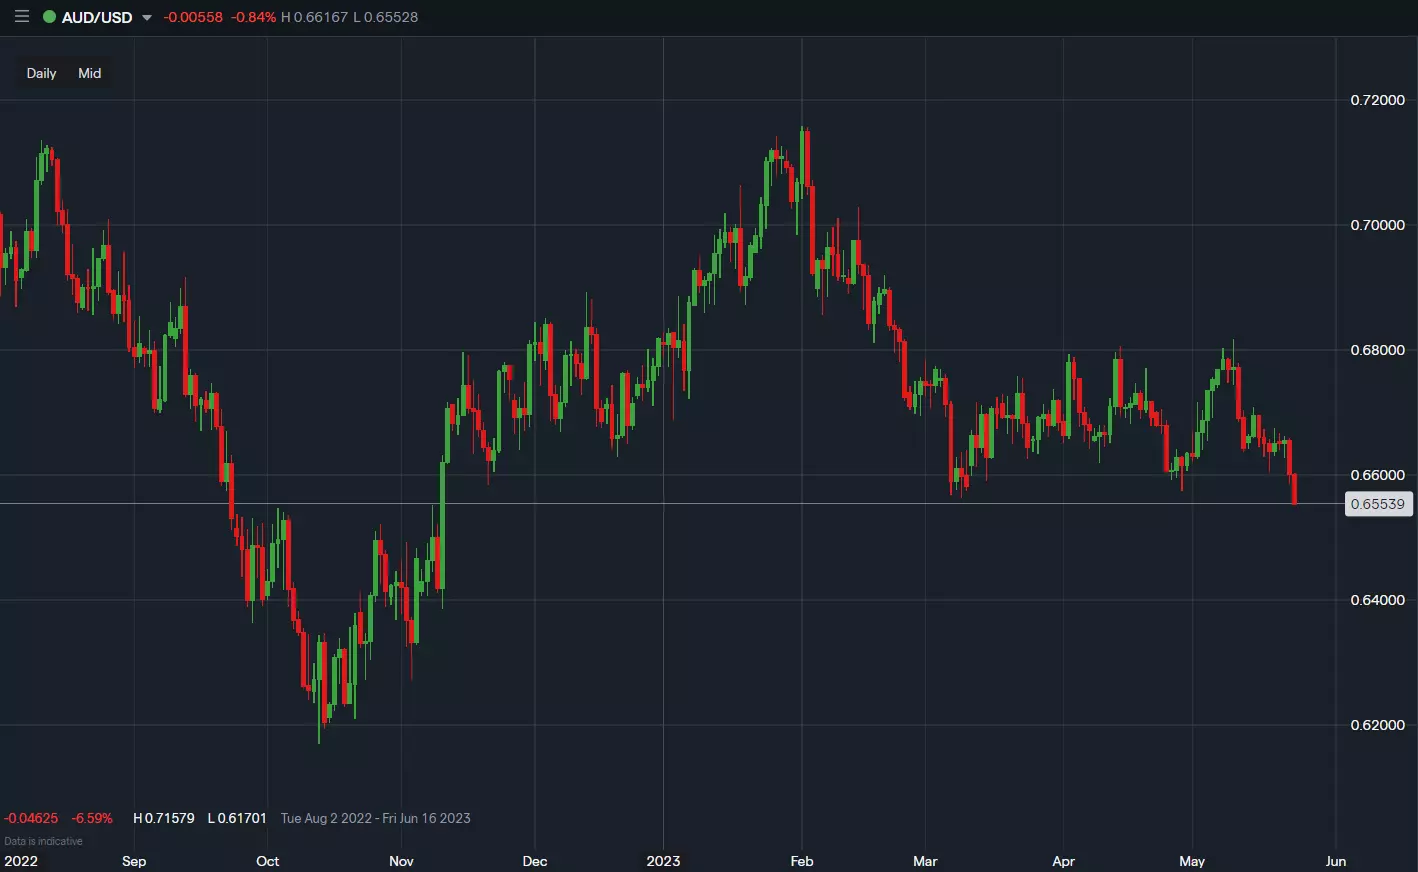 Australian dollar (AUD/USD) prices have traded lower against US dollar in recent trade, but it is still above its historical lows.